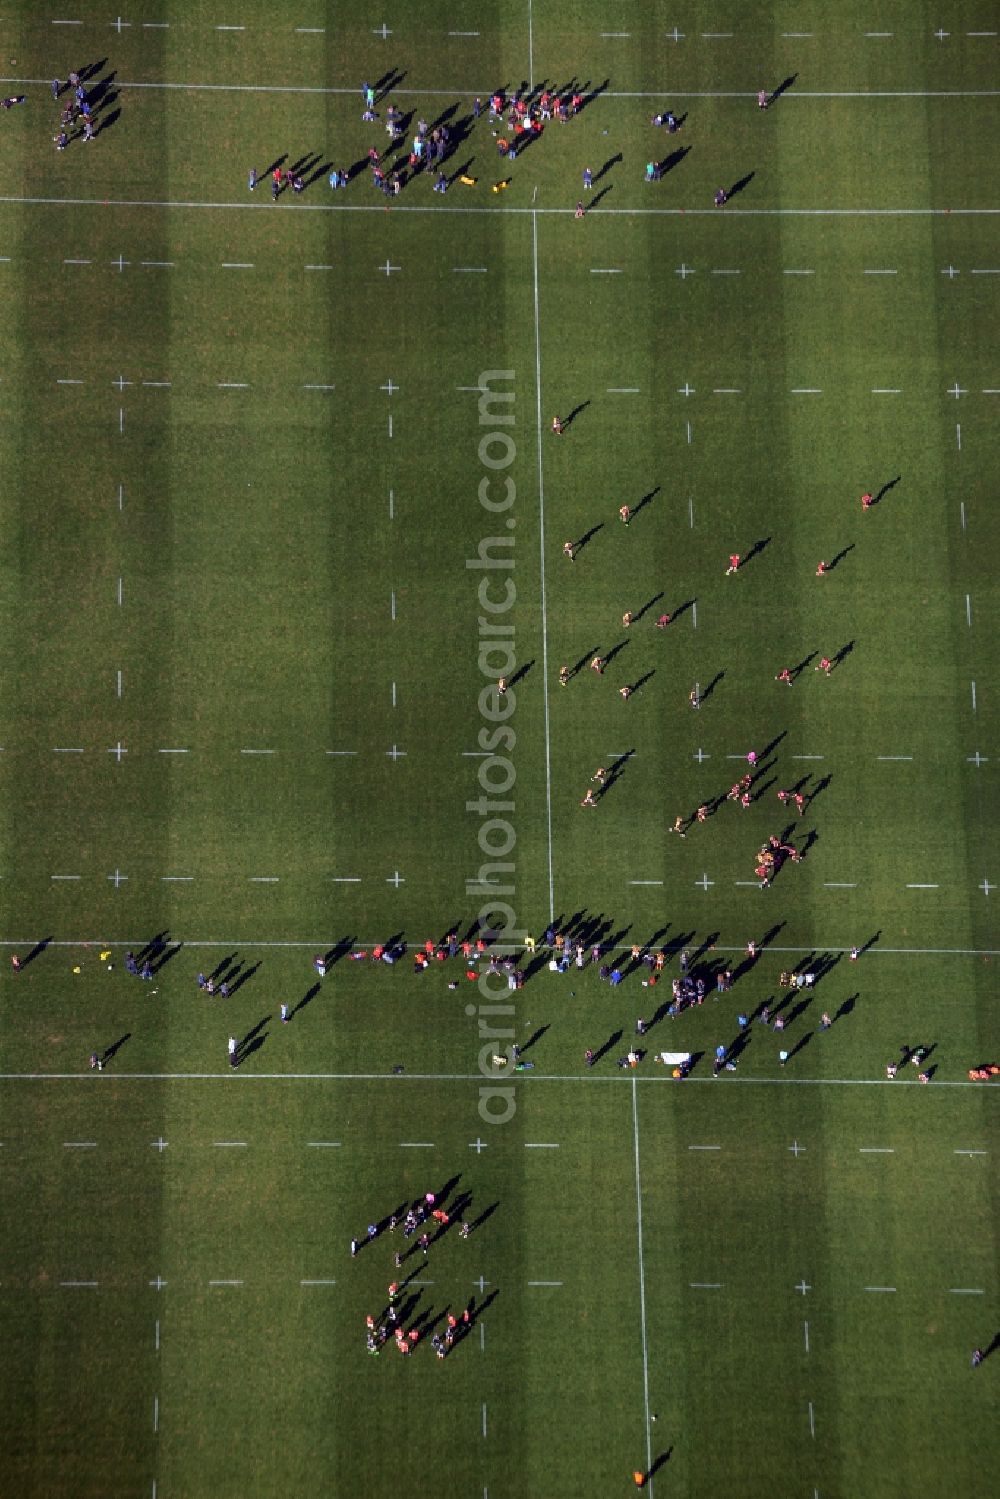 Berlin from the bird's eye view: Participants of the sports event of the Berliner Rugby Club eV on the sports field Glockenturmstrasse on Maifeld in Berlin